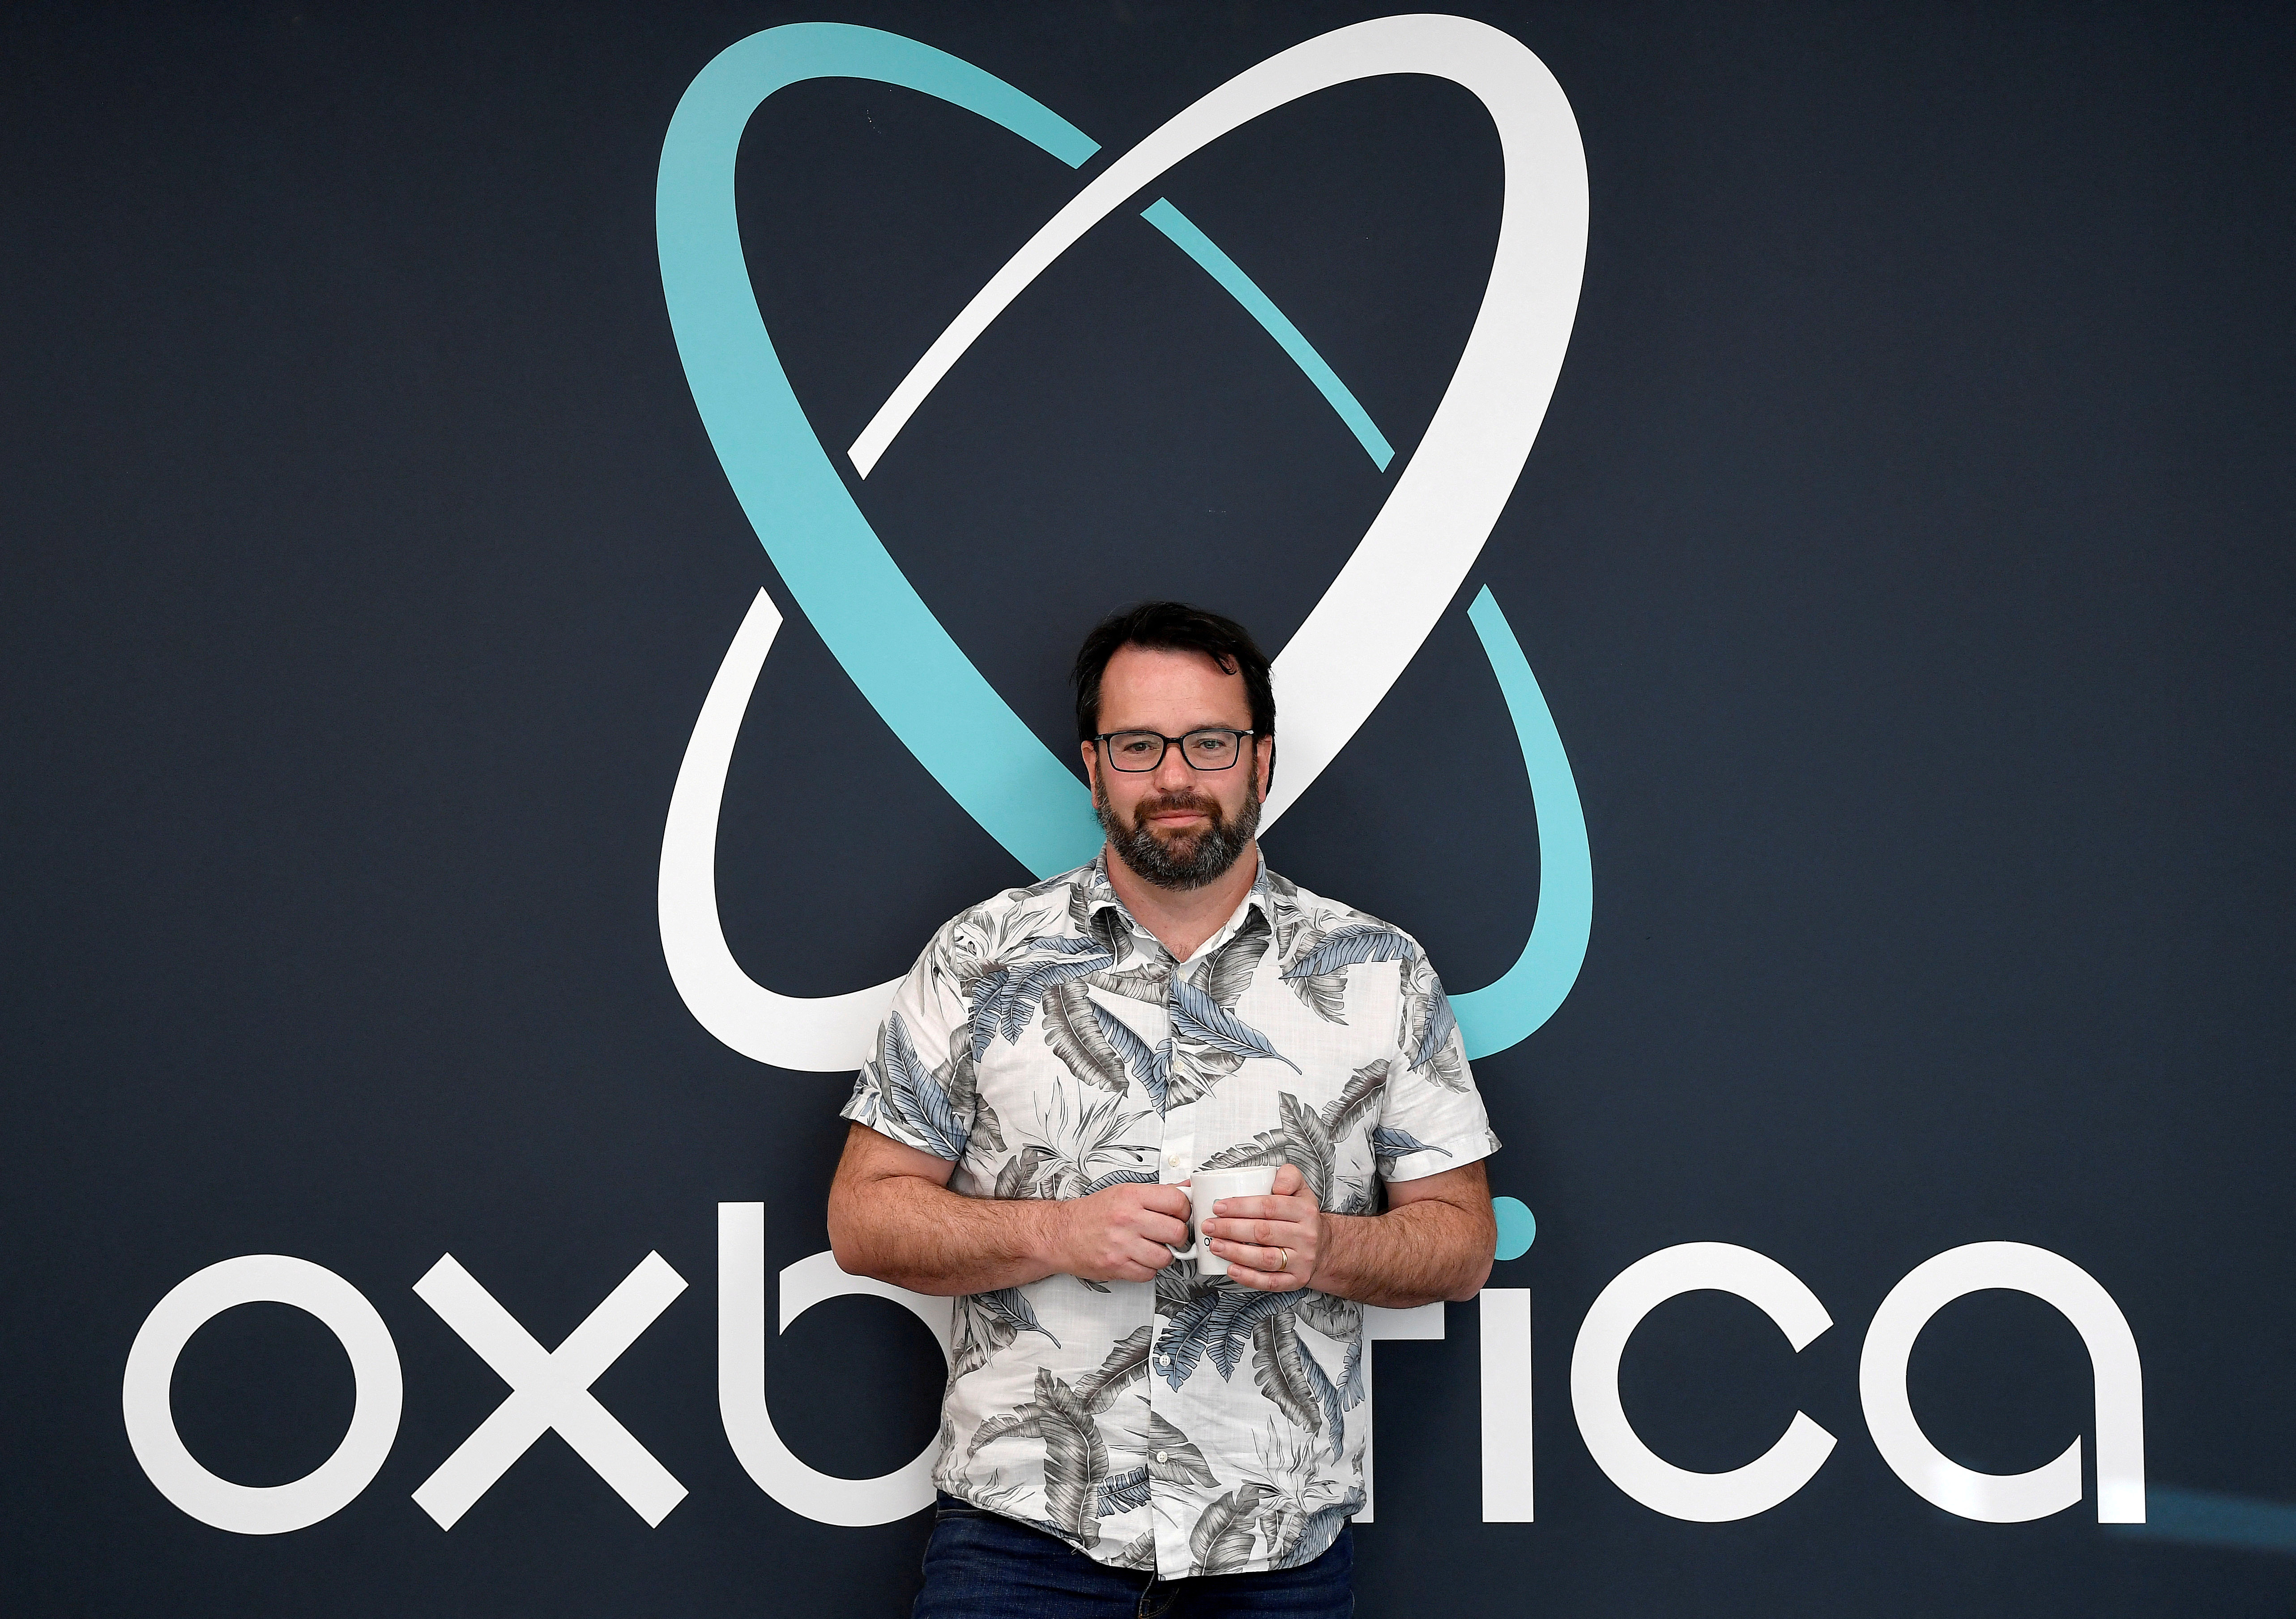 Paul Newman, co-founder of Oxbotica, an autonomous vehicle technology tech firm, poses for a photograph at their company headquarters in Oxford